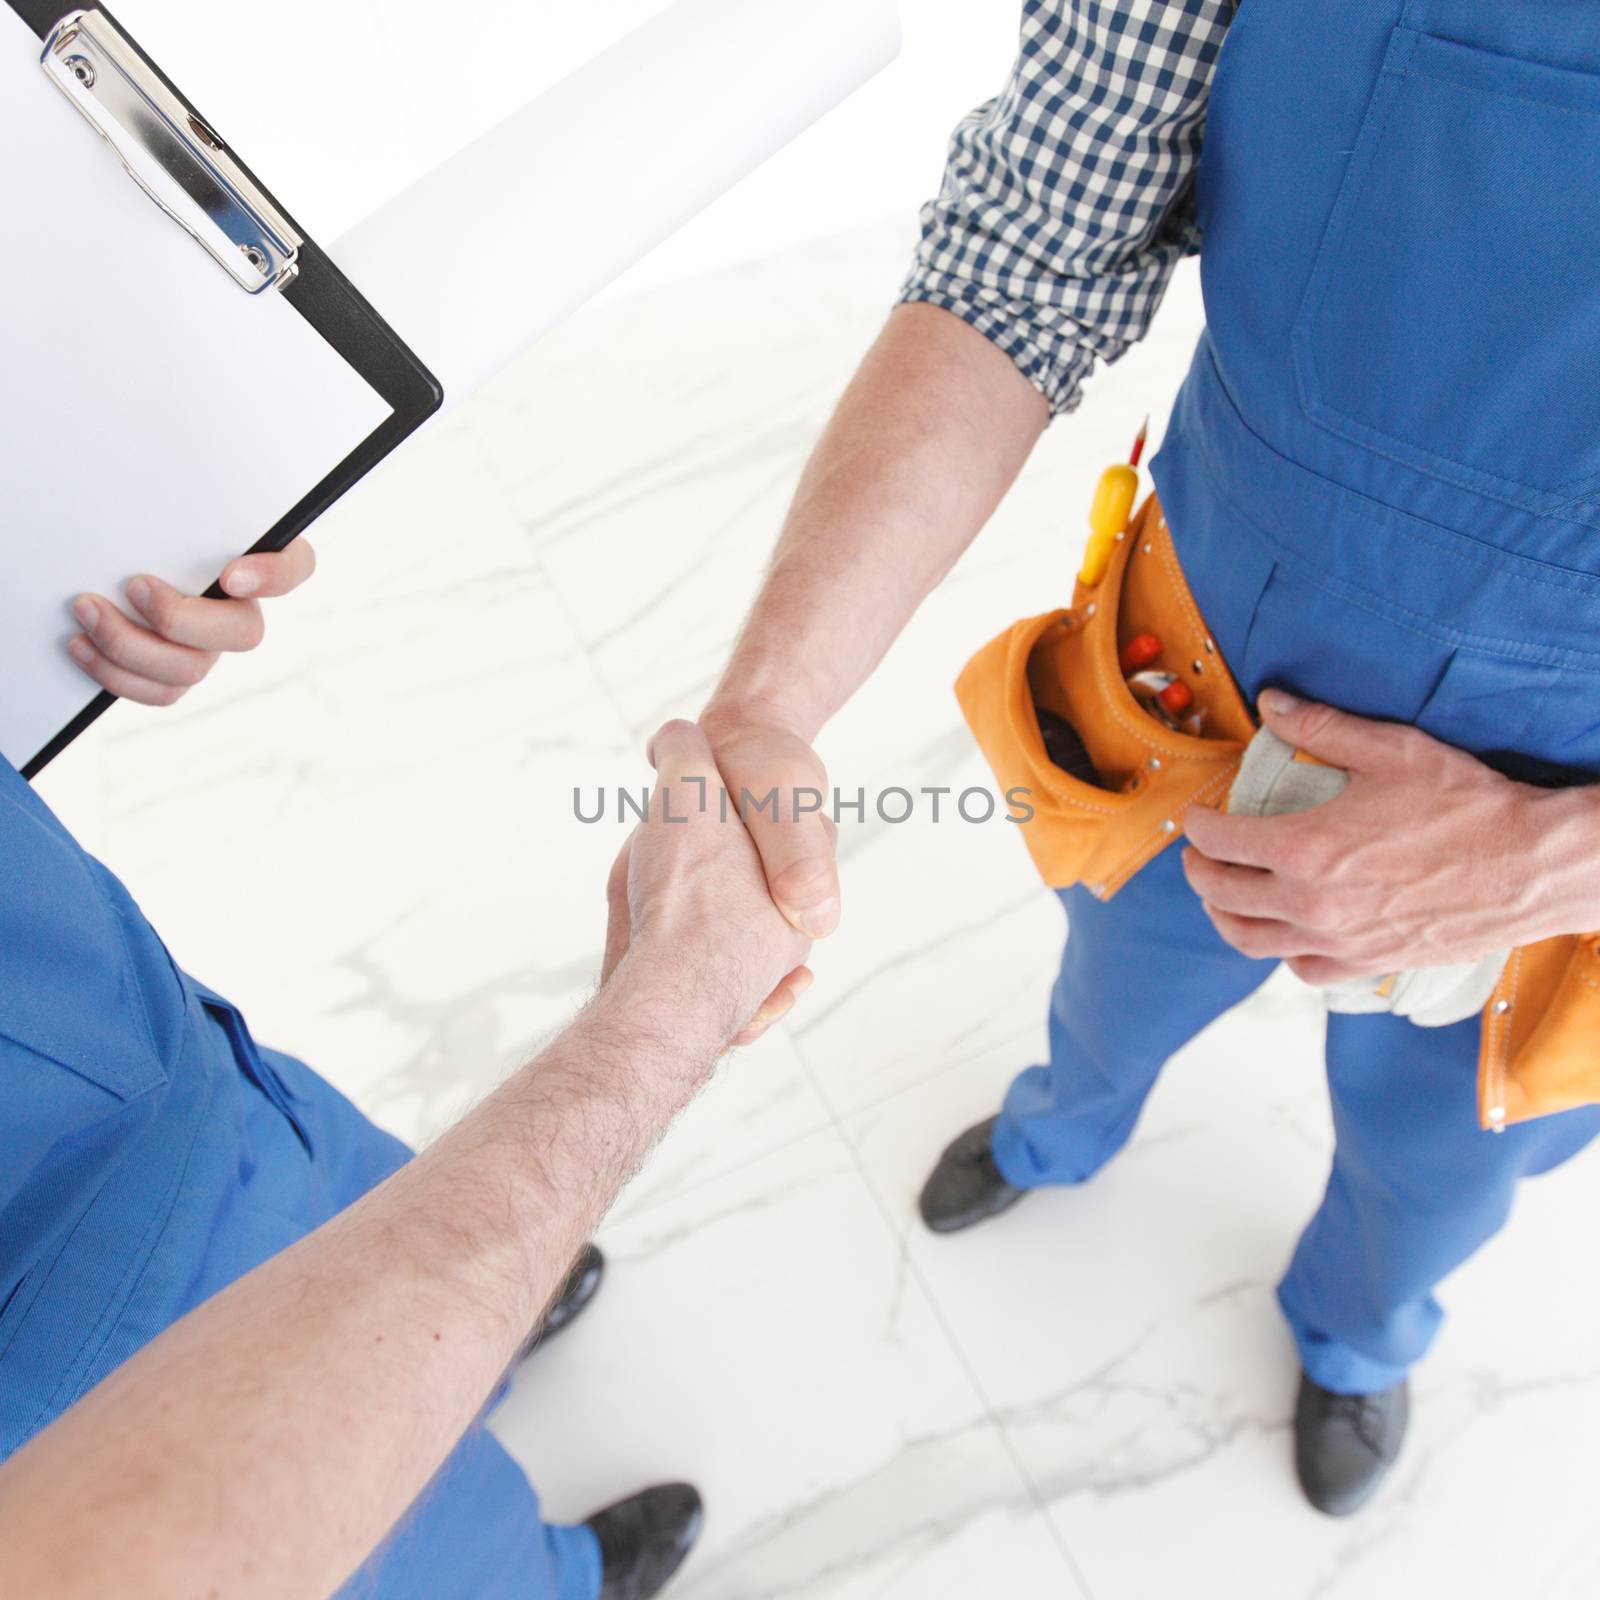 Two construction workers shaking hands by ALotOfPeople